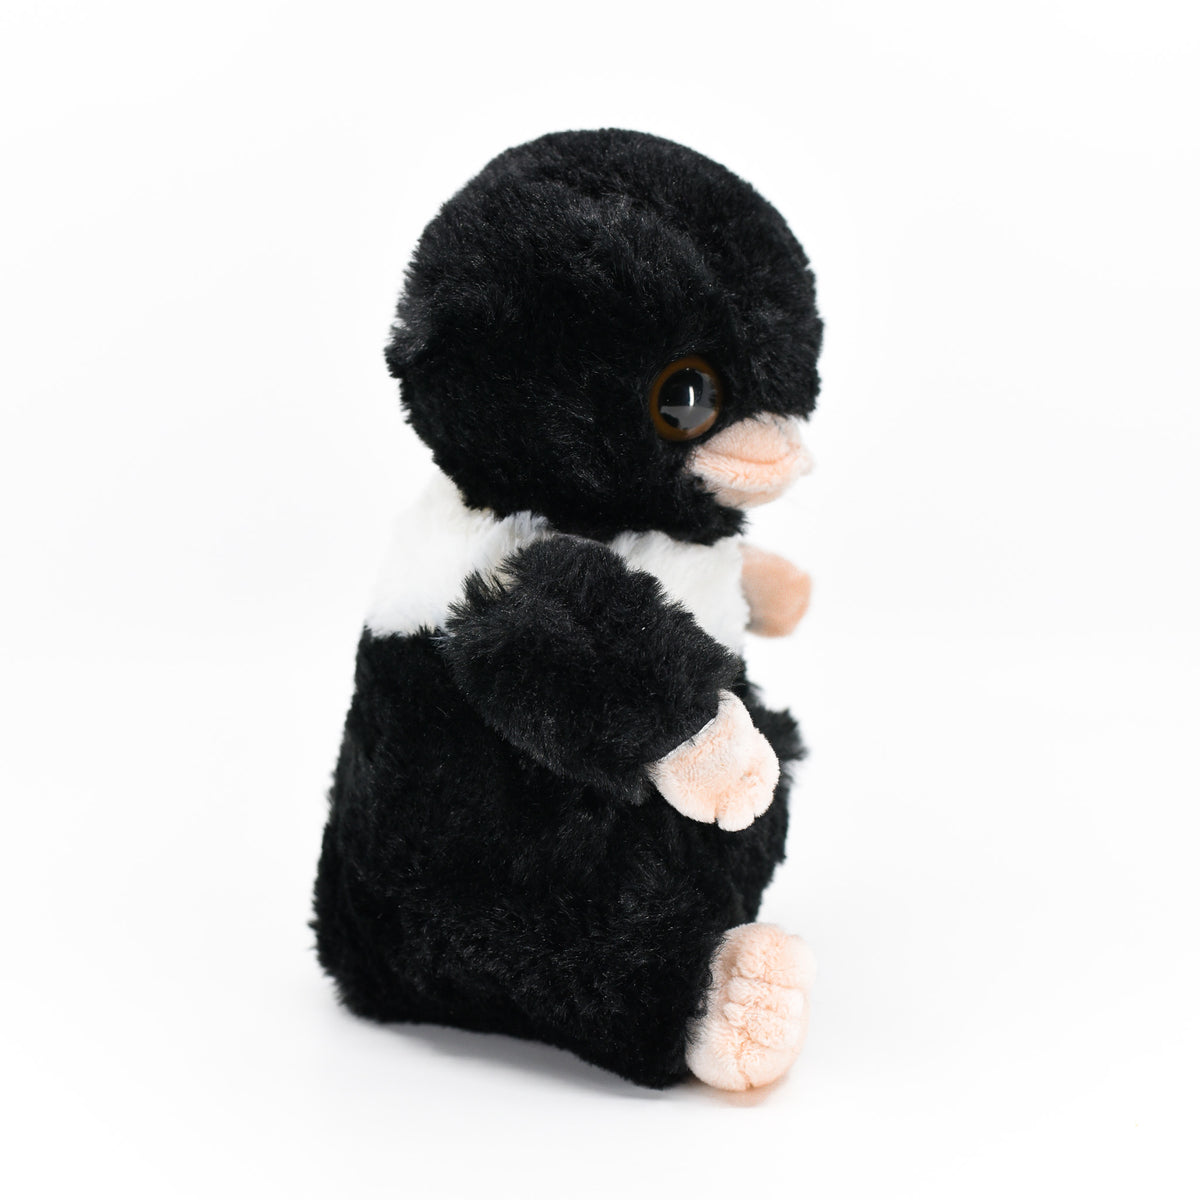 Thief Plush alternate angle from the side